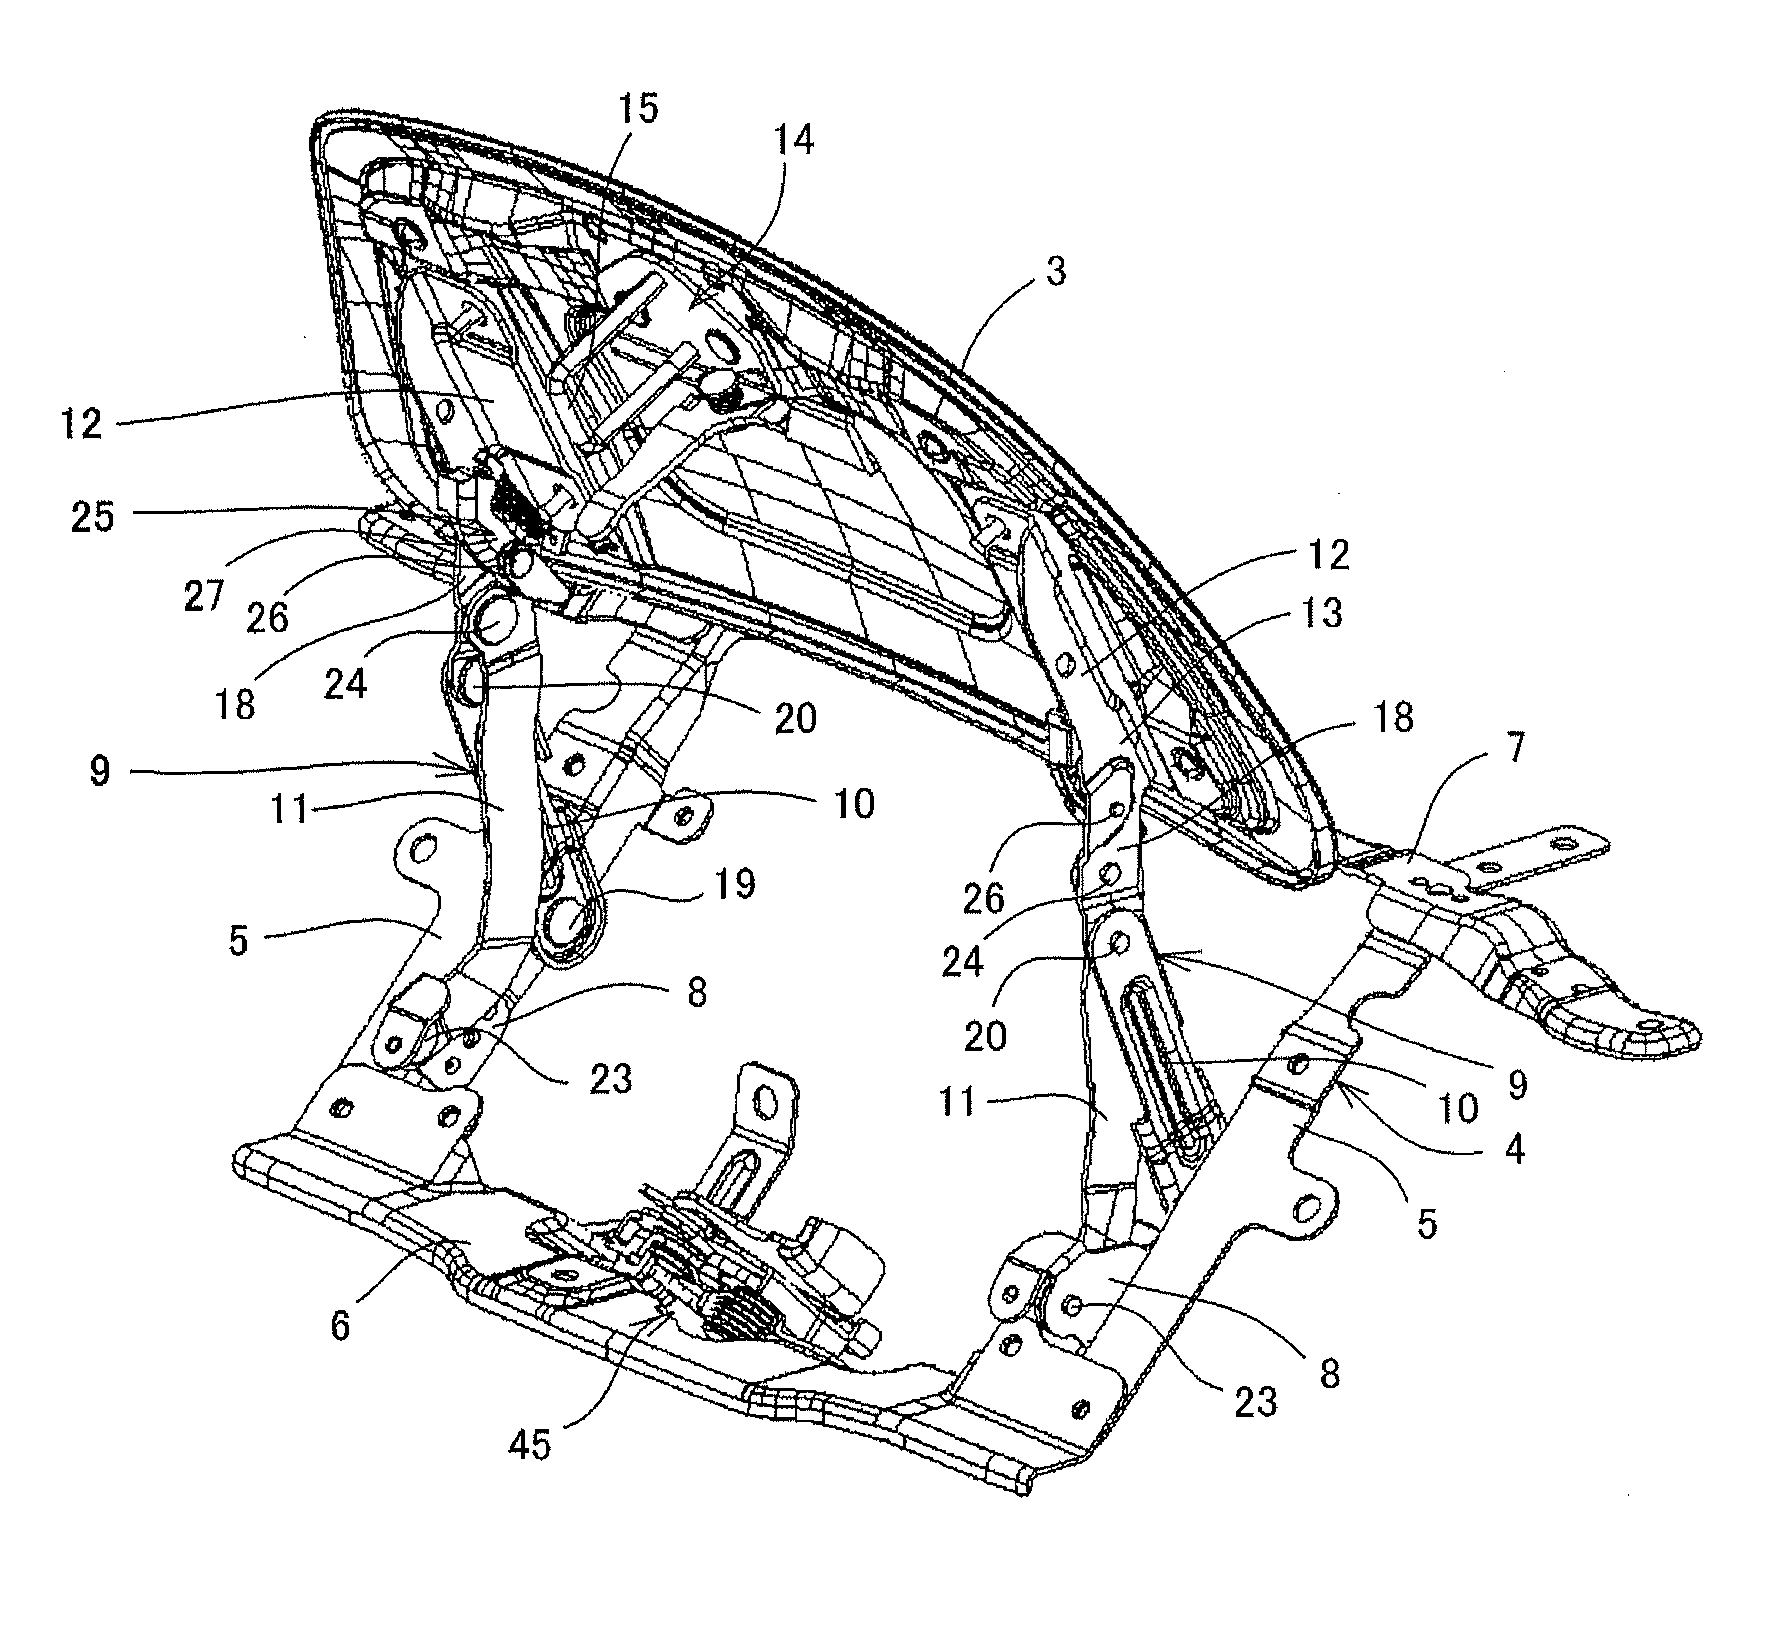 Lid opening and closing apparatus